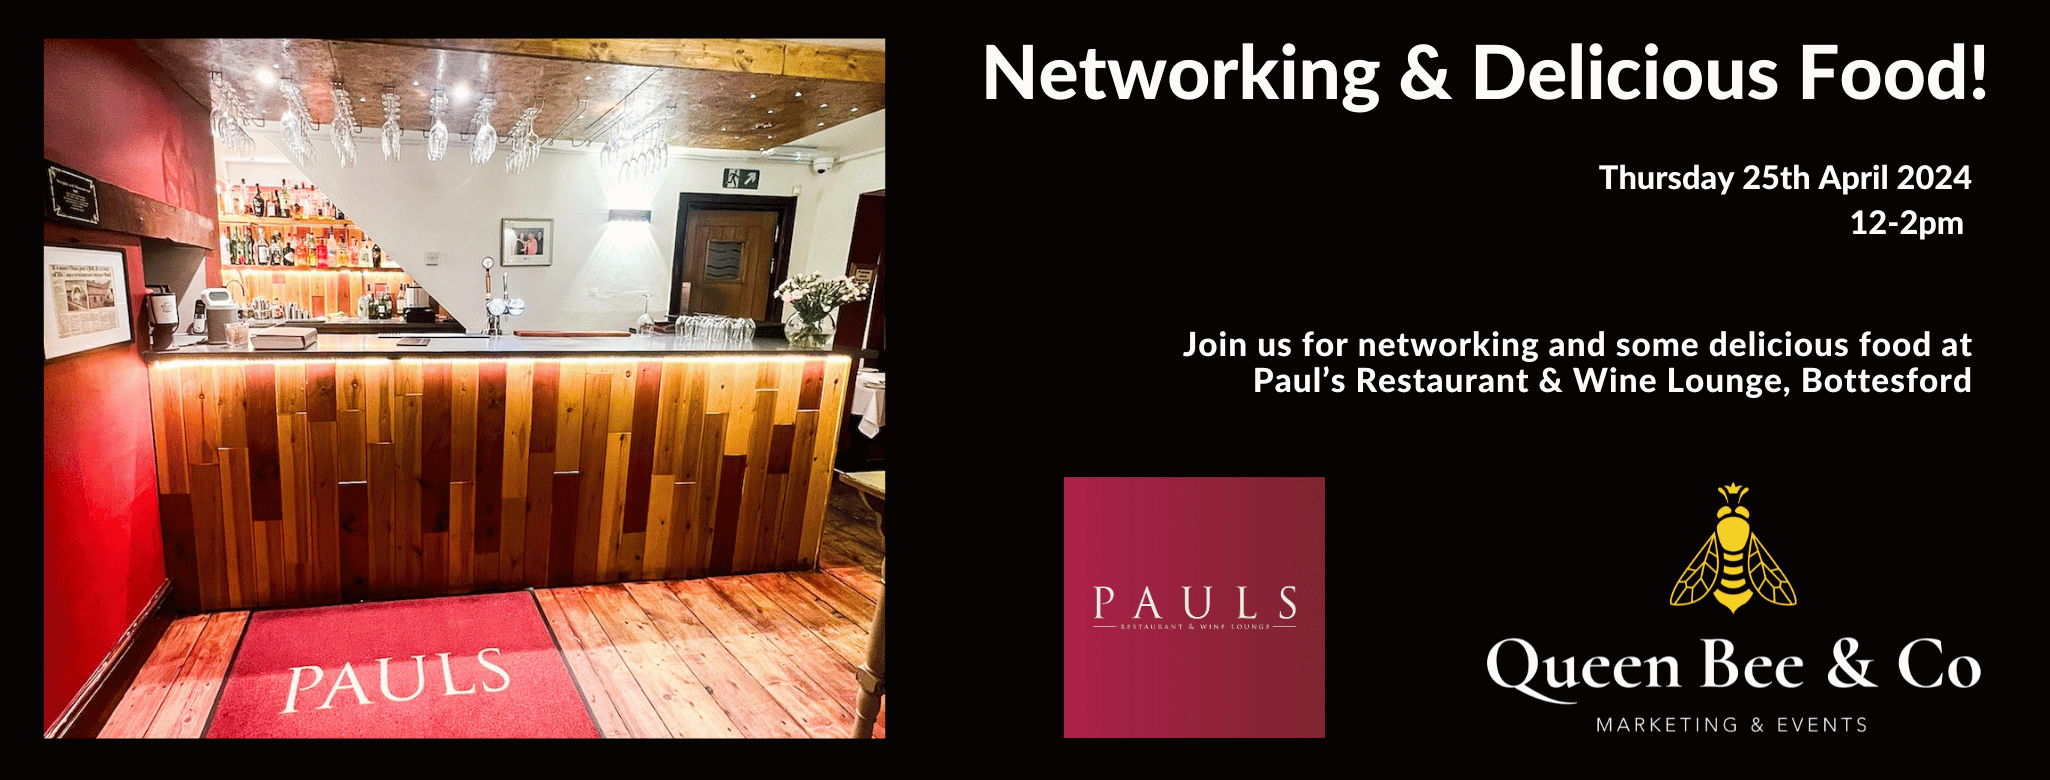 lunchtime networking at pauls restaurant bottesford